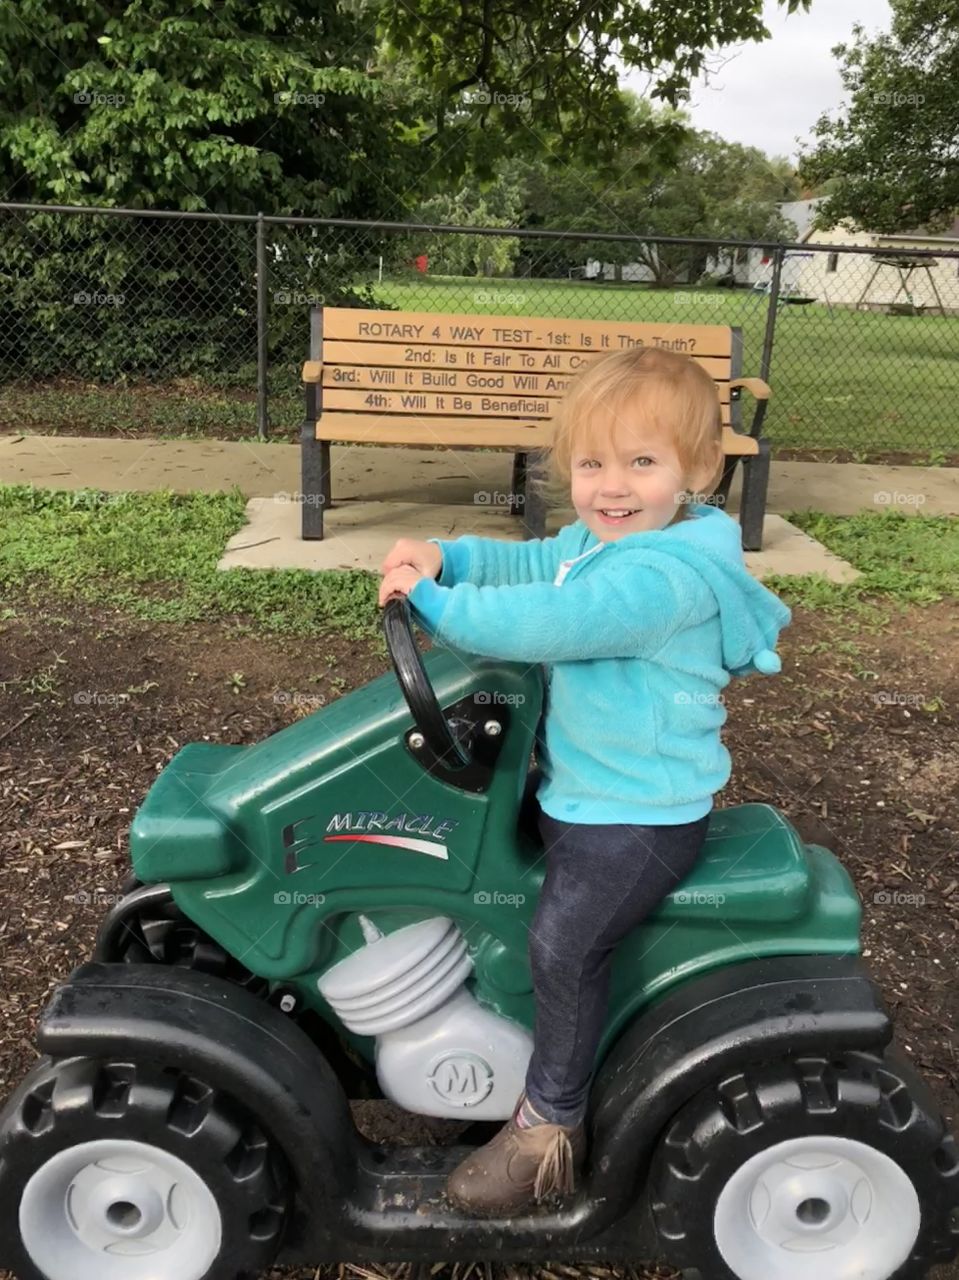 Little girl on Tractor Toy in the Park 